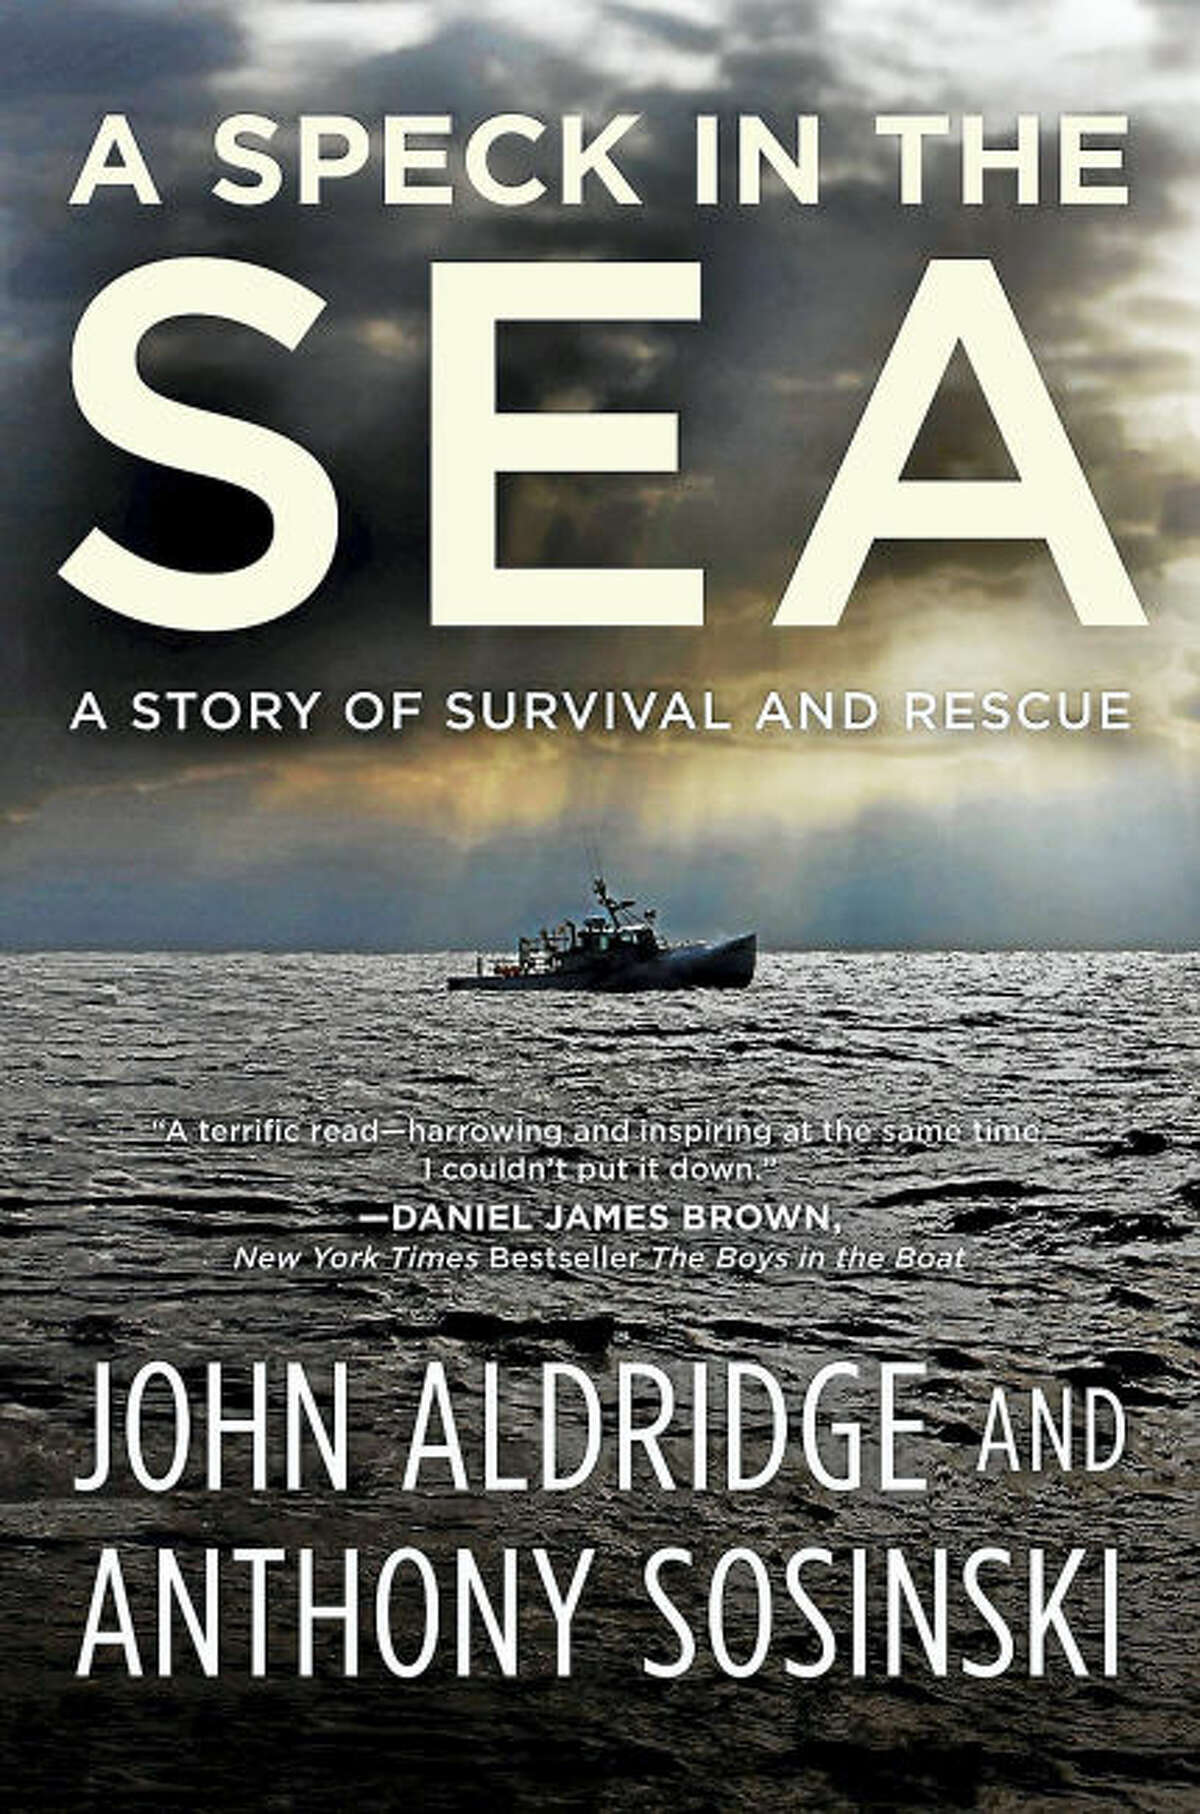 A Speck in the Sea: A Story of Survival and Rescue will be available for purchase on May 23. The book chronicles the 12 hours John Aldridge was overboard and alone in the Atlantic Ocean while his partner and the U.S. Coast Guard looked for him.